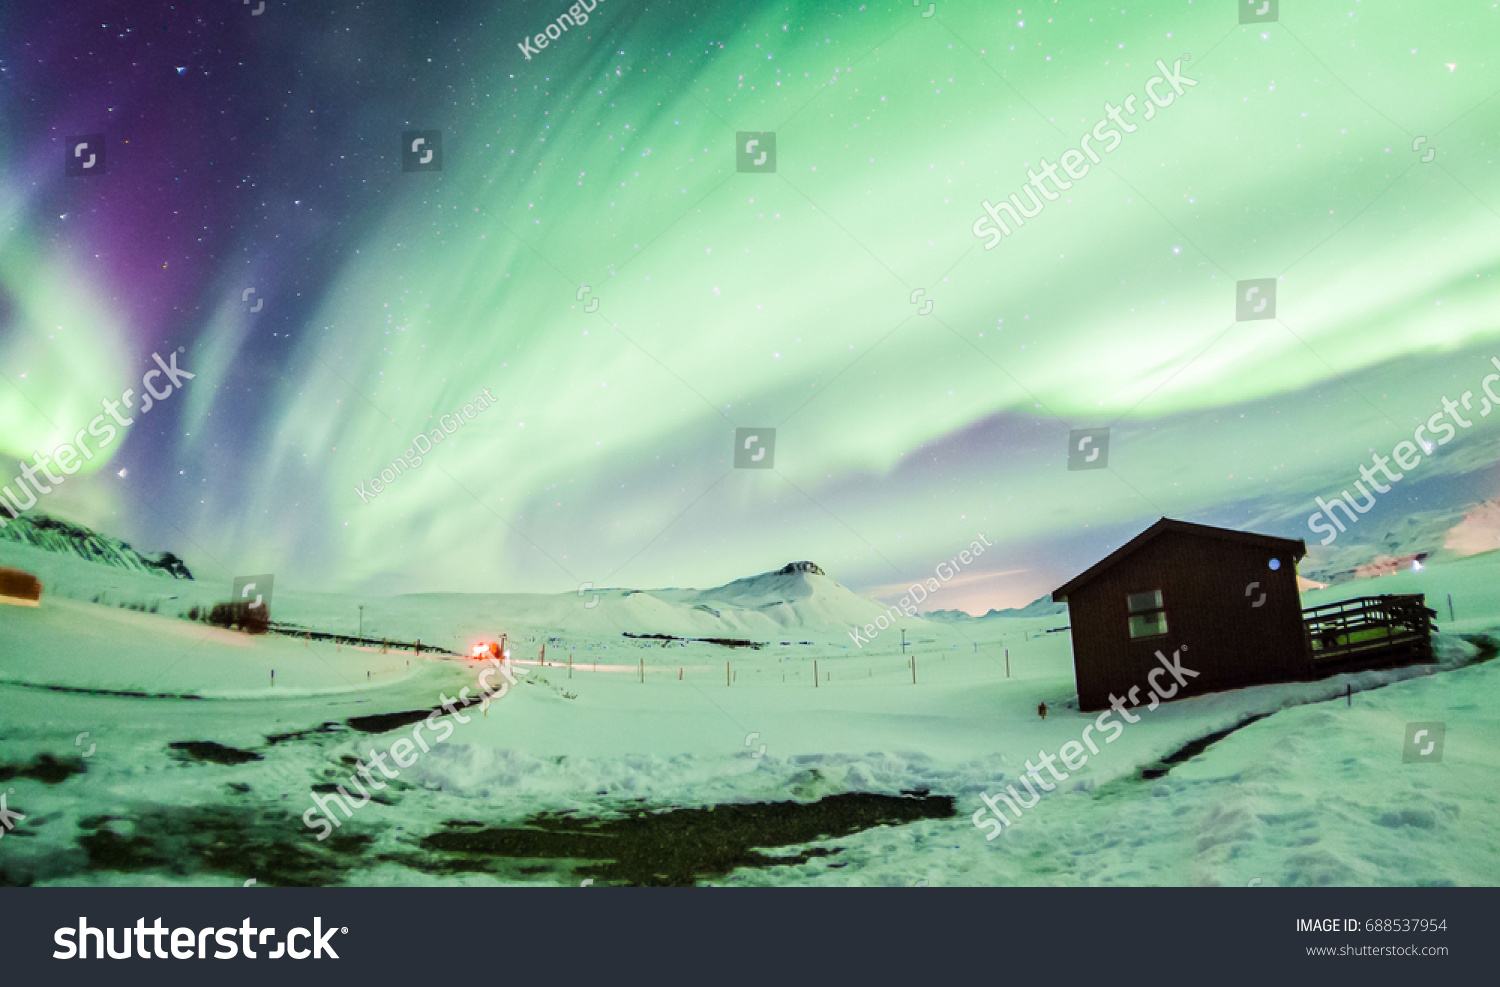 Aurora Borealis or better known as The Northern Lights for background view in Iceland, Reykjavik during winter #688537954